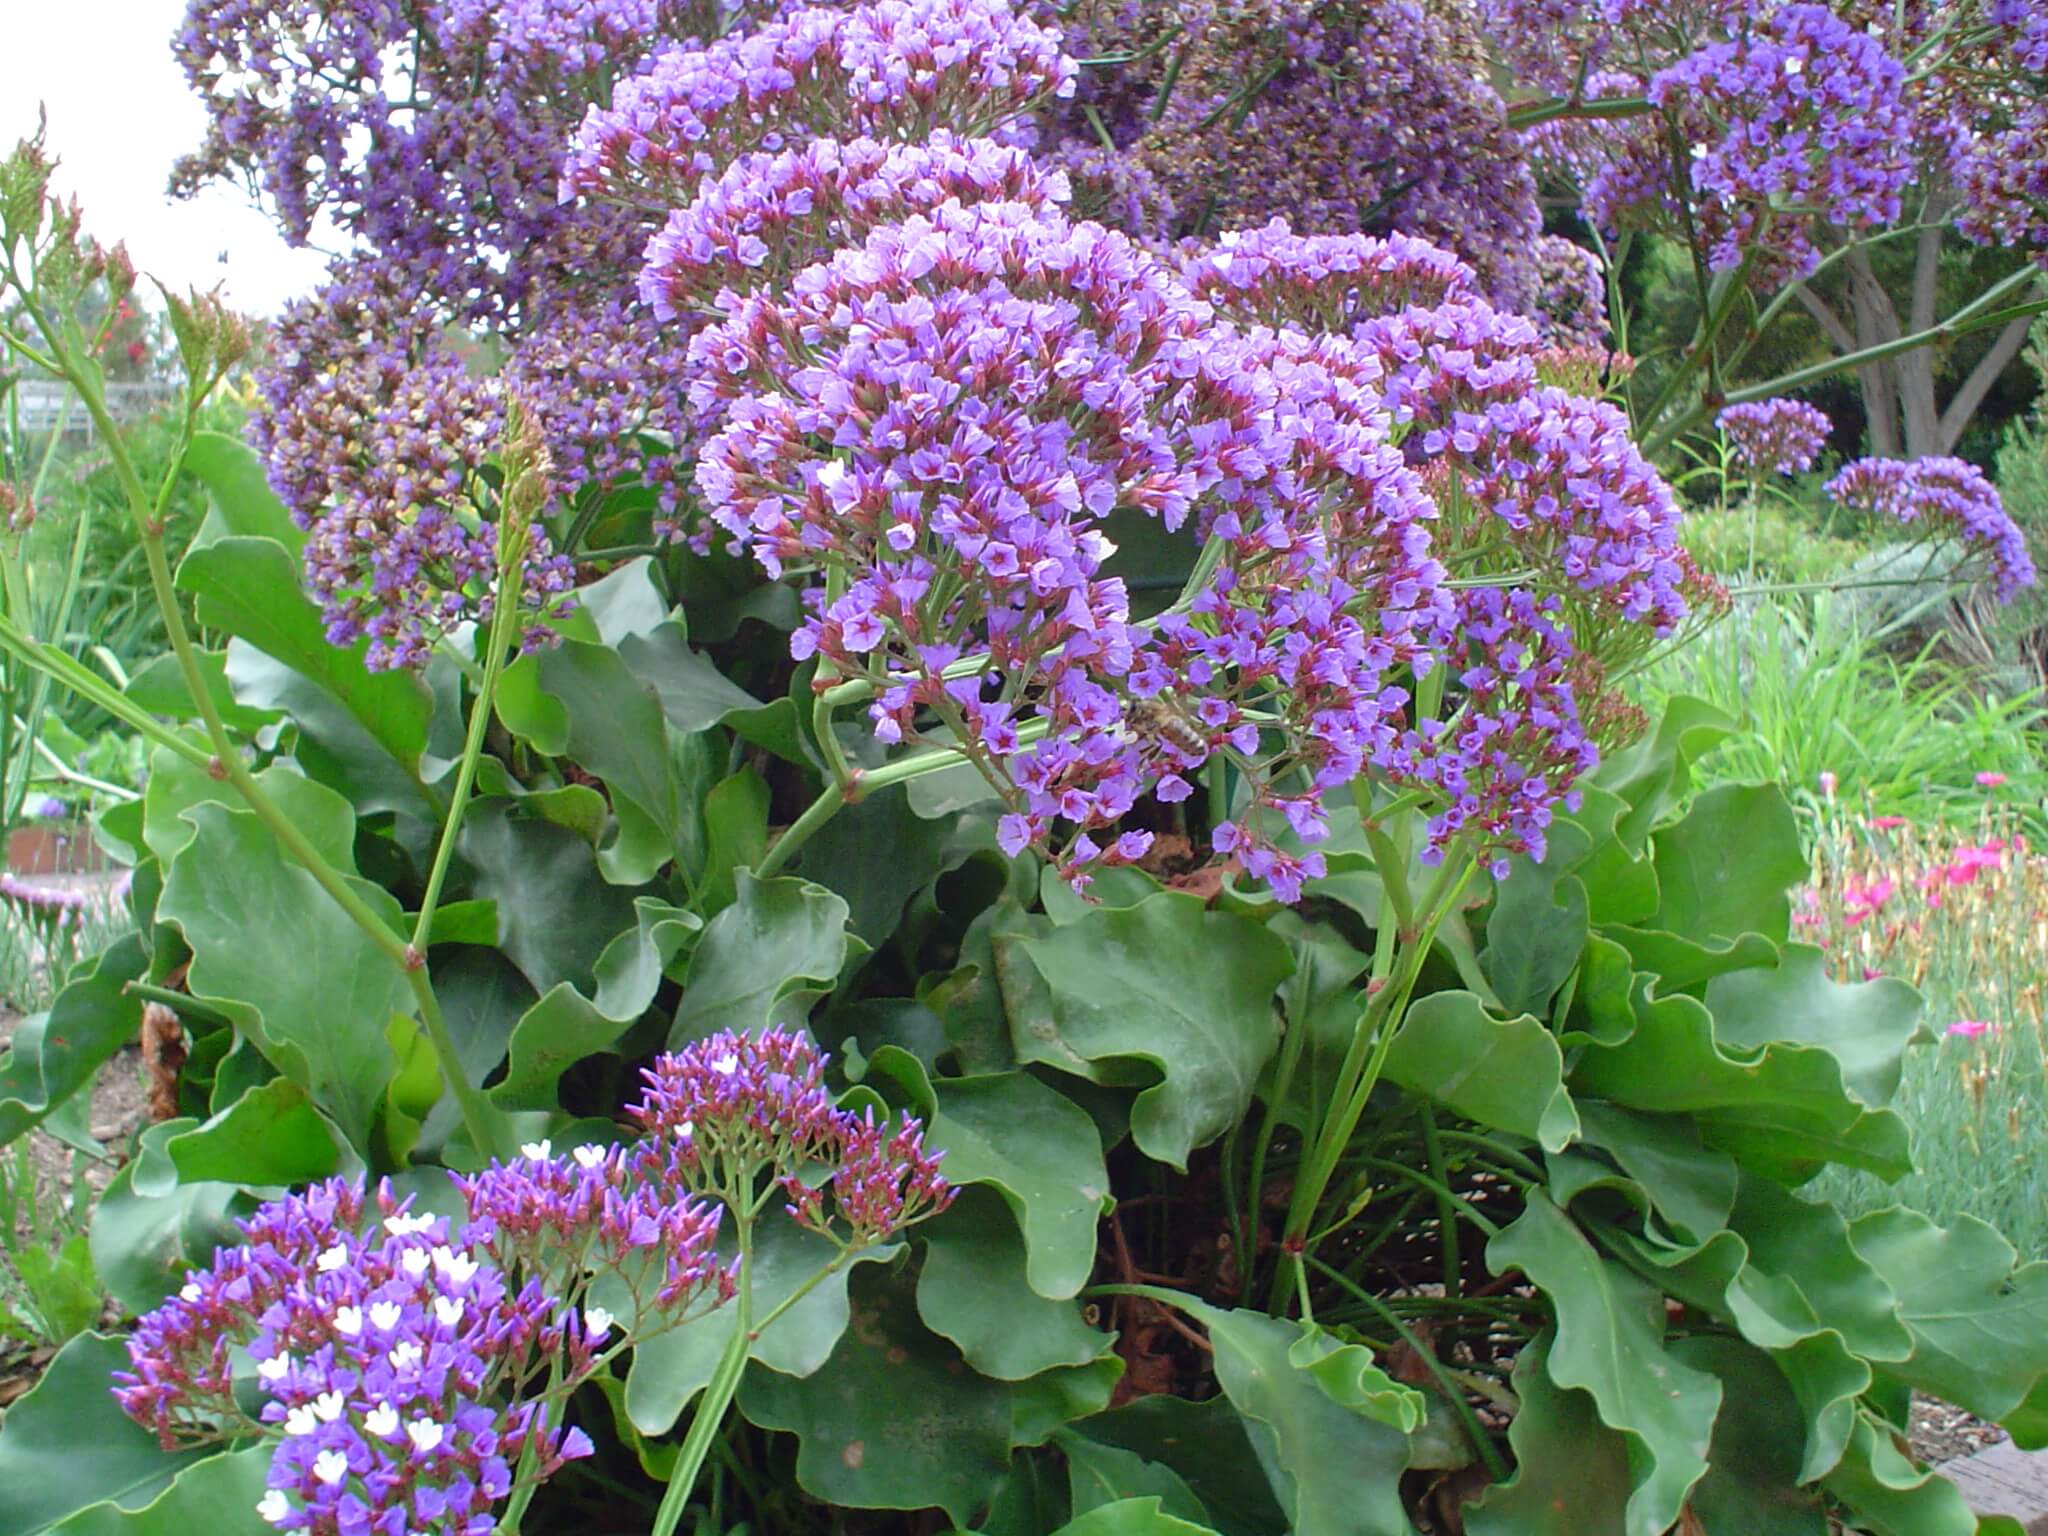 This perennial statice, Limonium perezii is frost tender but tough as nails in salt air and coastal conditions.